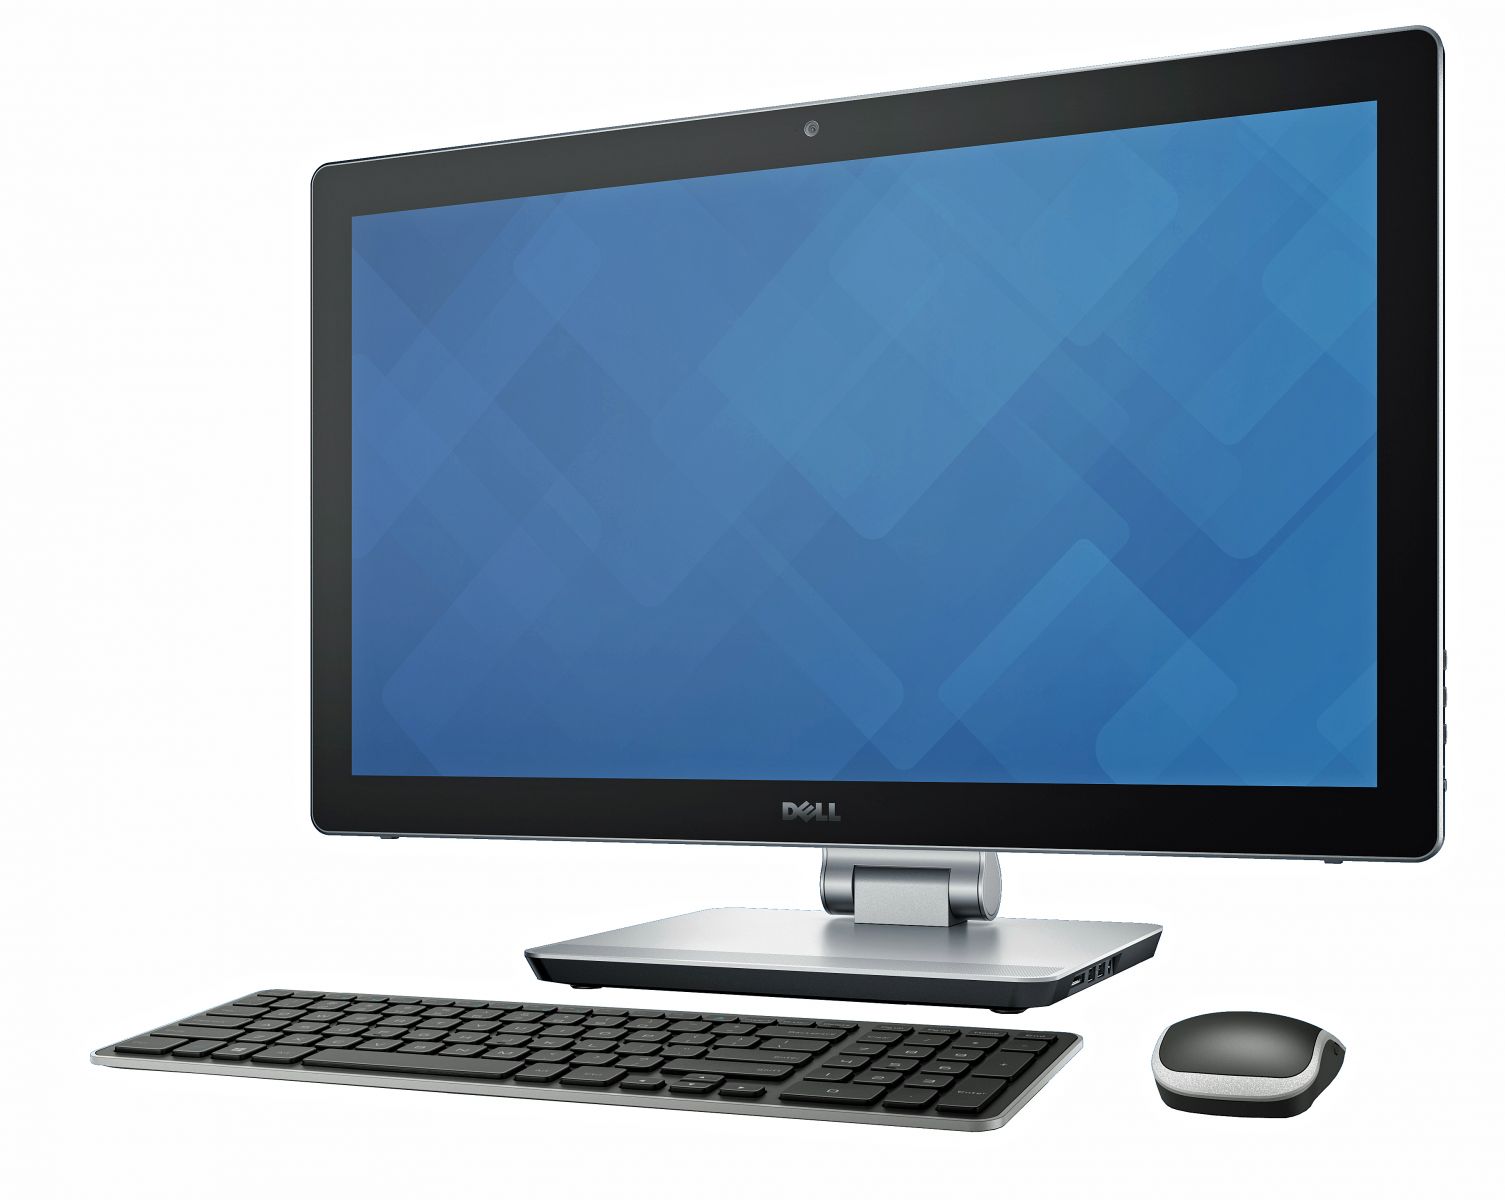 Review: Dell Inspiron 24 7000, filling a niche